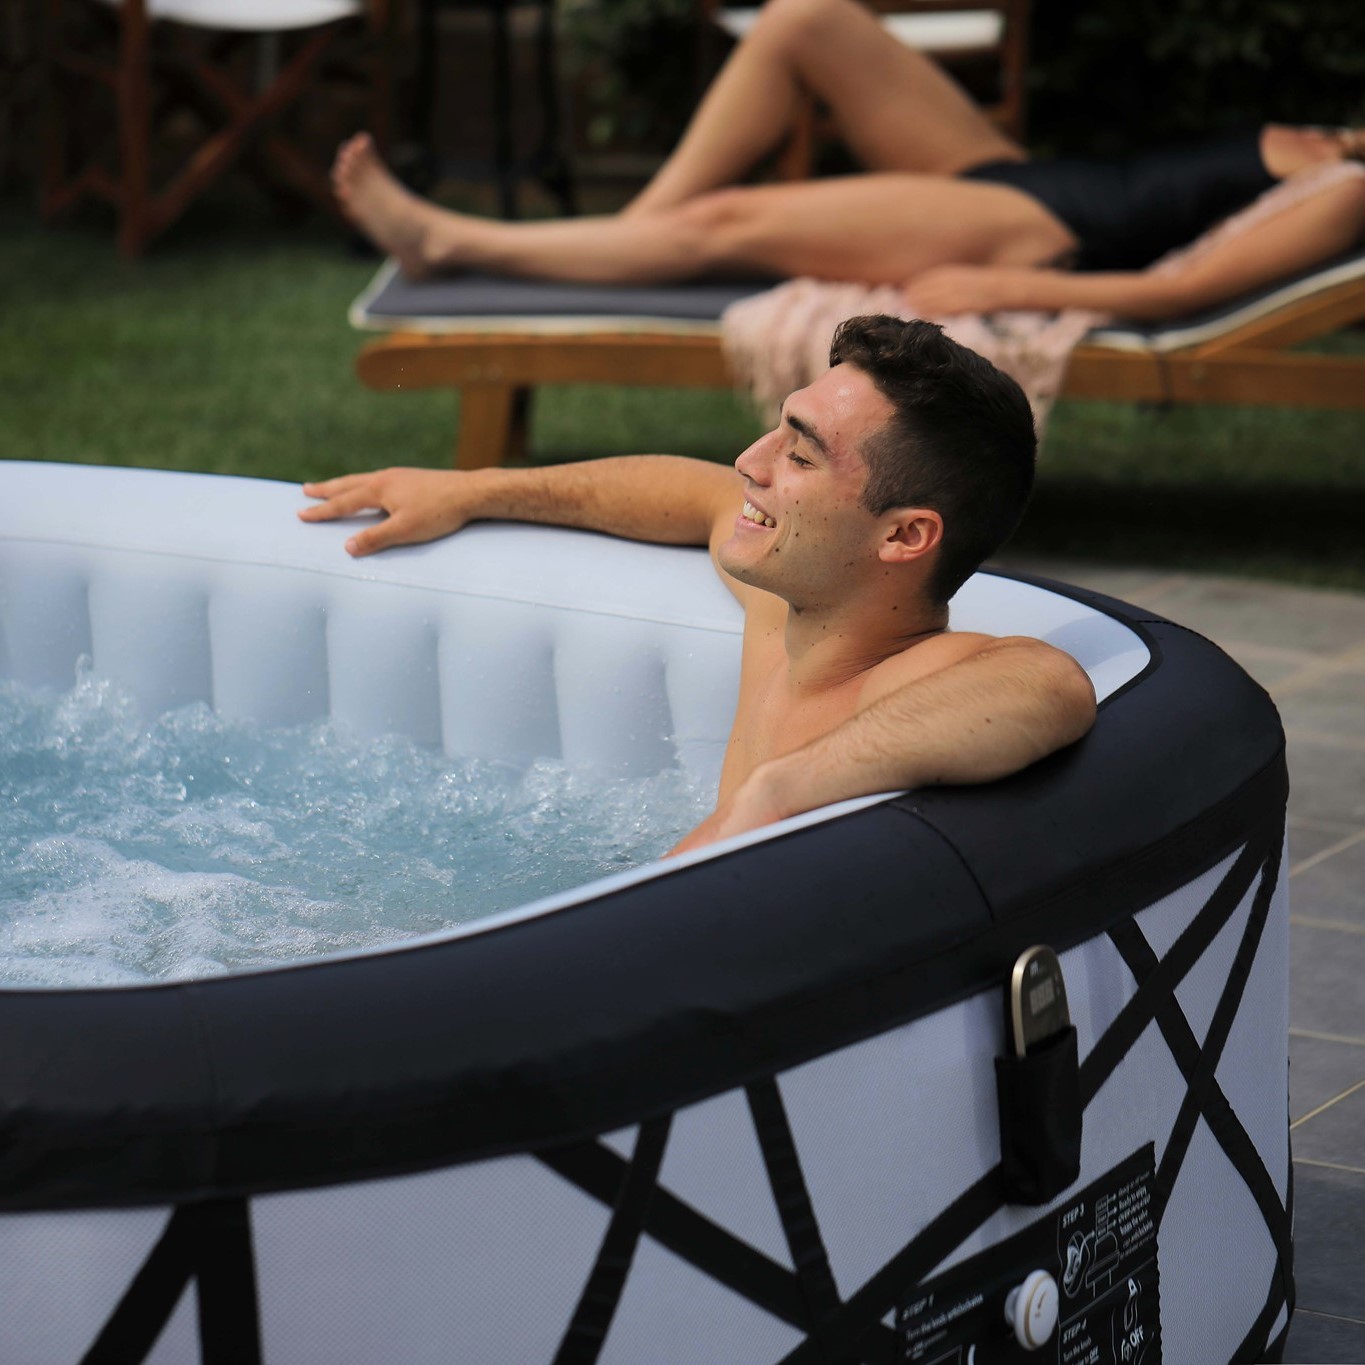 MSpa inflatable hot tubs in stock - Camaro, Soho and Alpine. 
 Choose your favourite :-)

 » Outdoor Furniture Fuengirola, Costa Del Sol, Spain